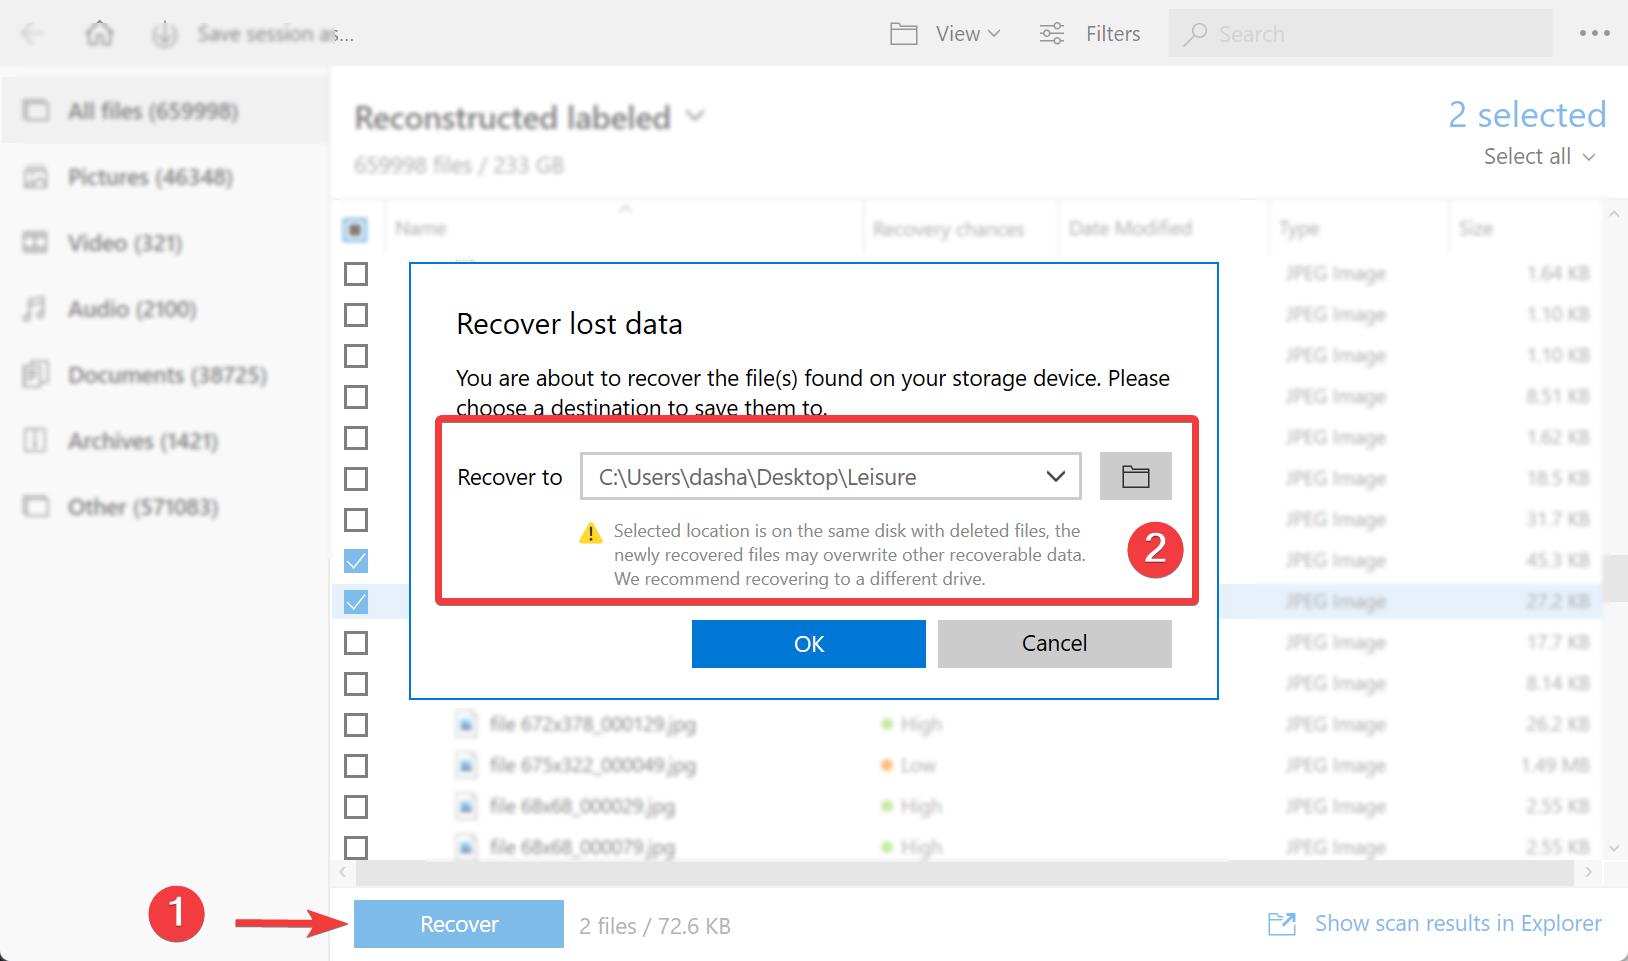 Recover selected files